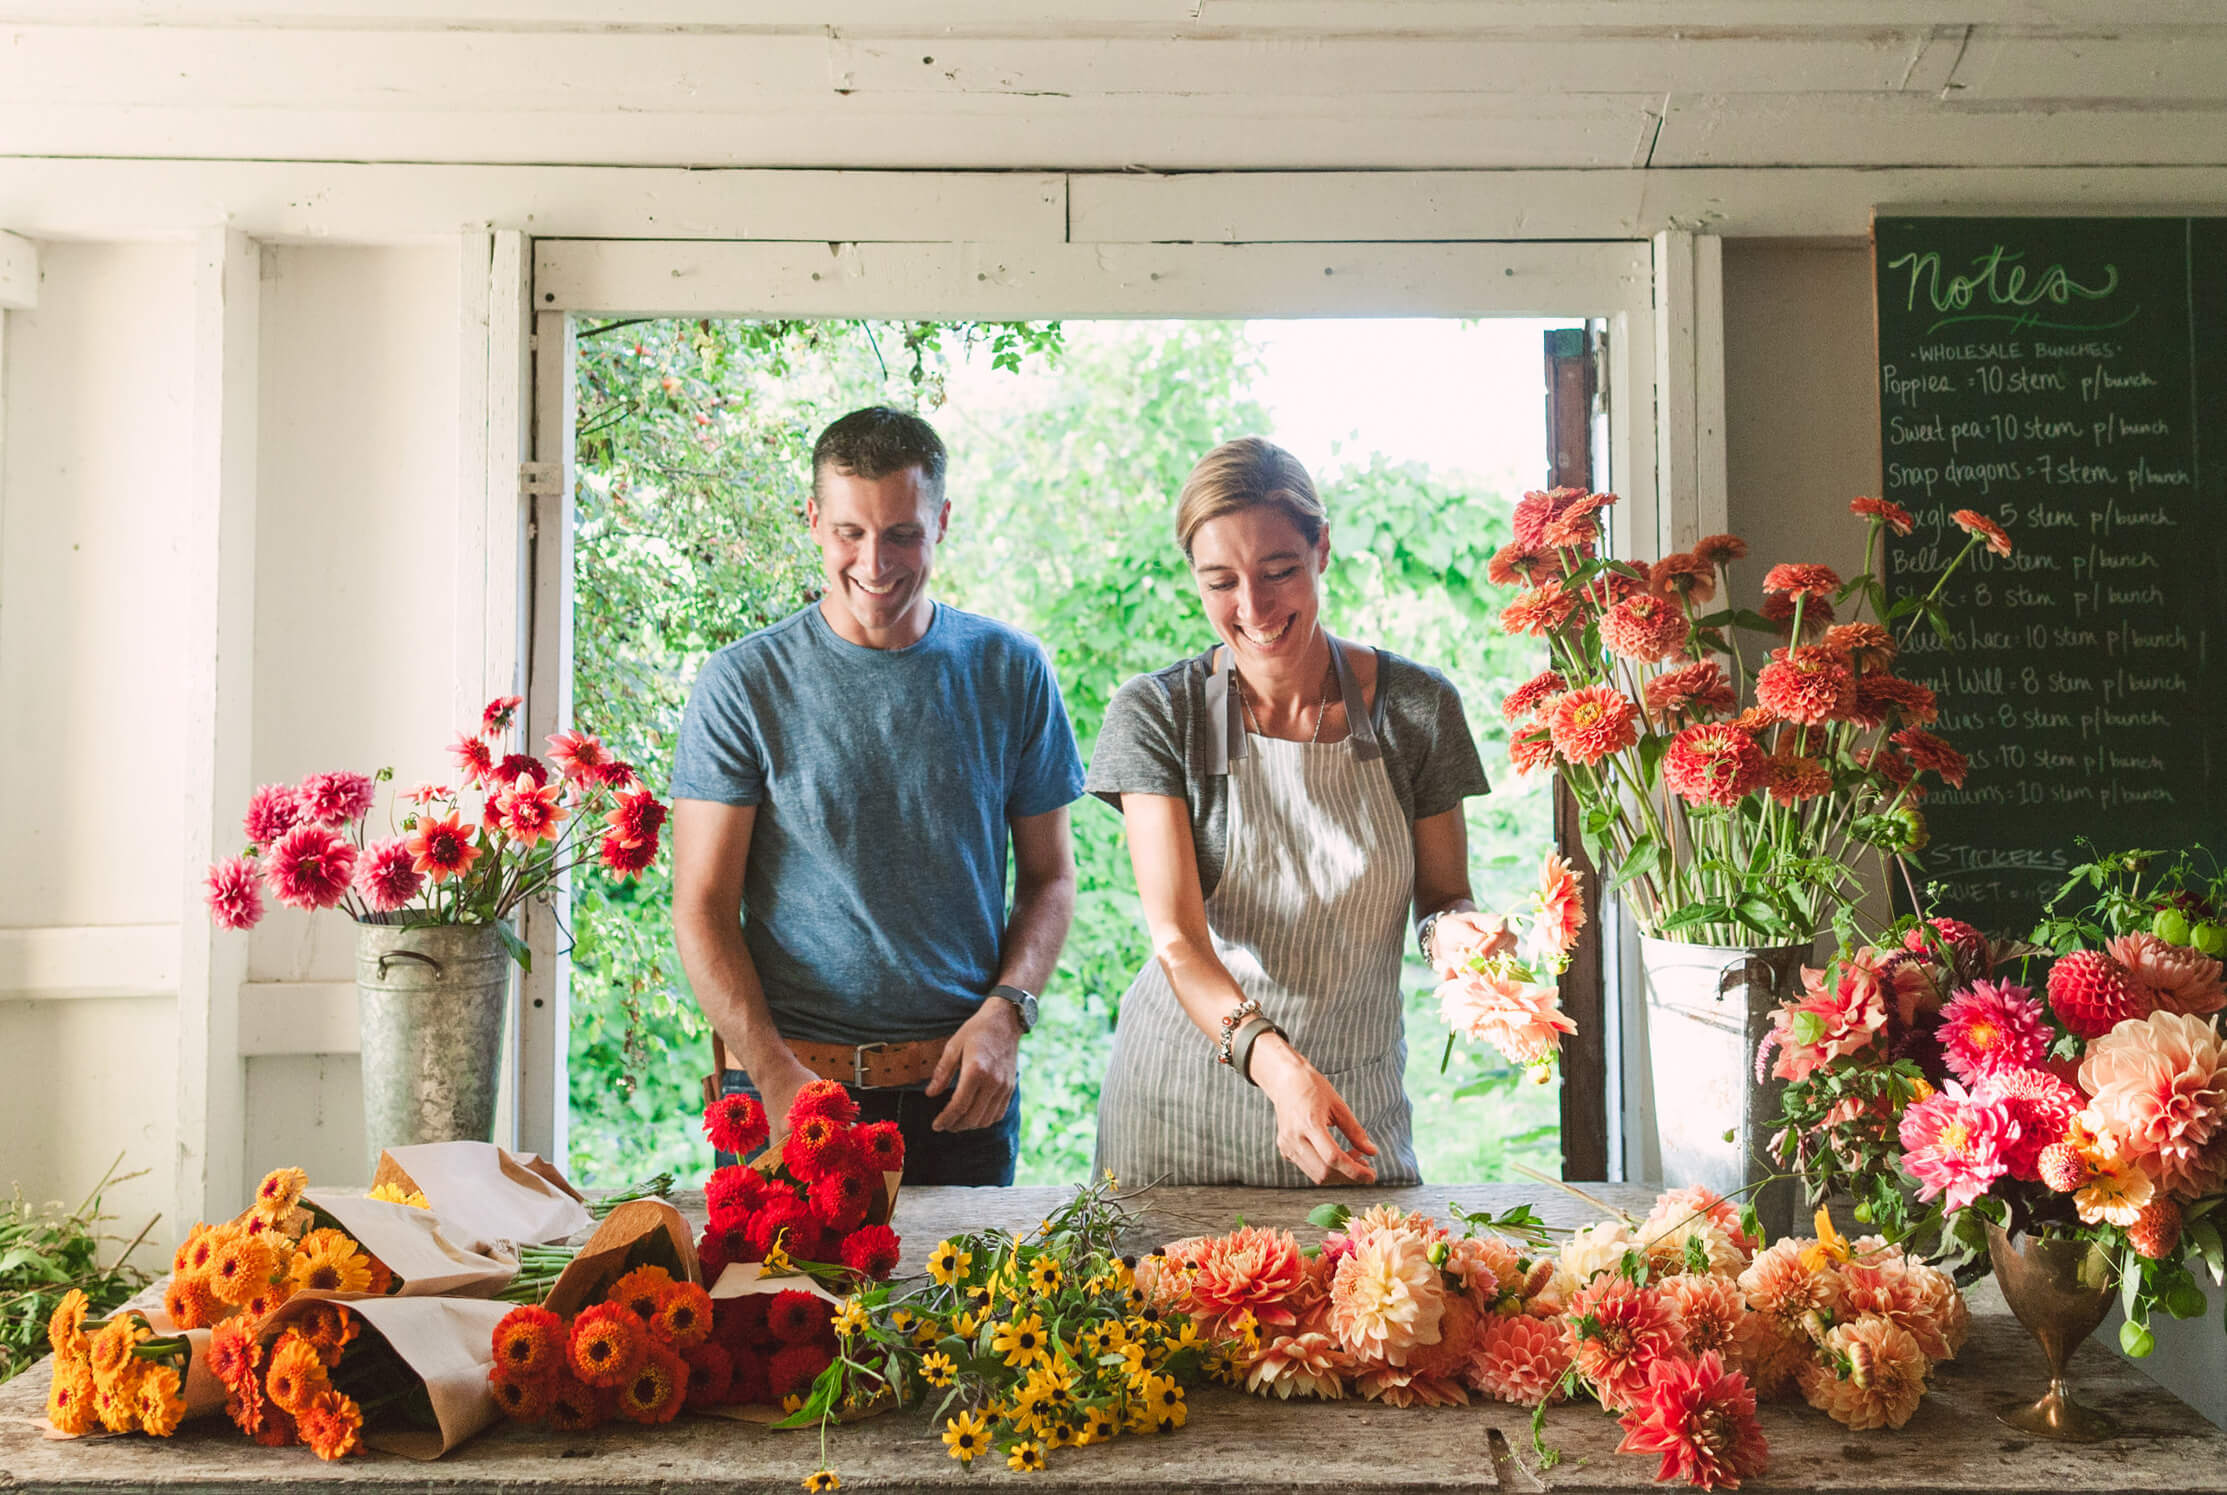 Behind the scenes at Floret Flower Farm, an Aeolidia client